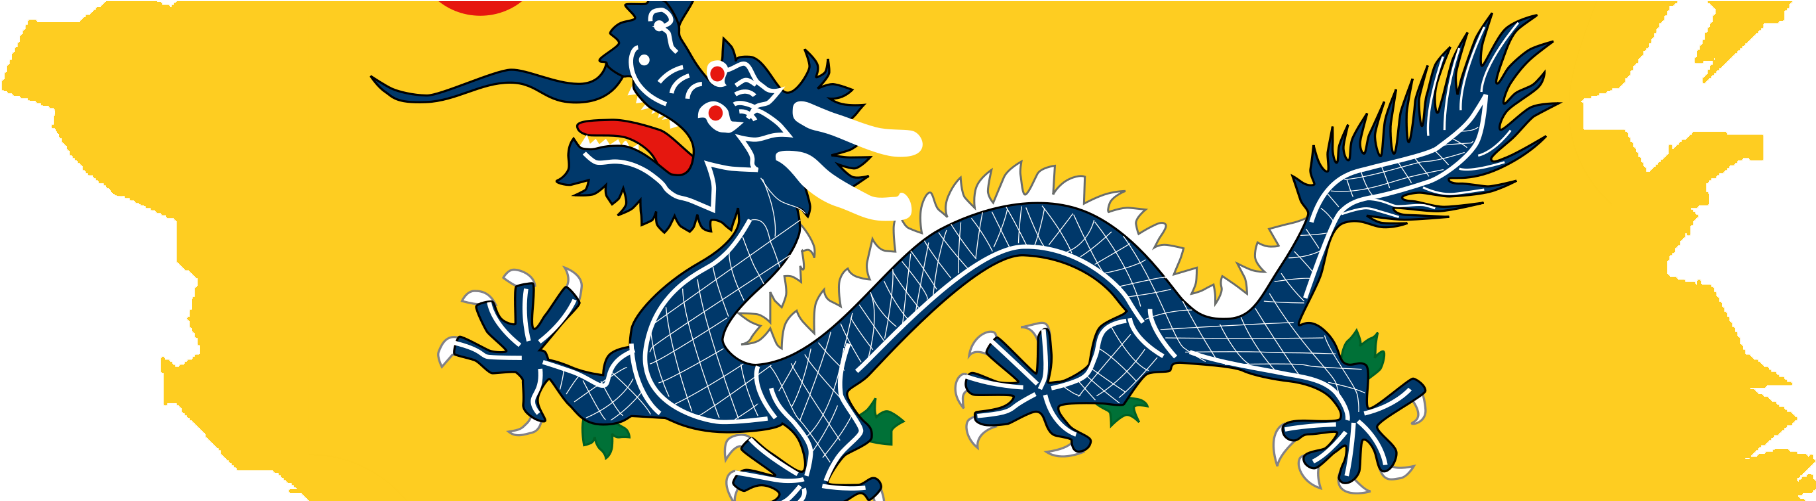 Jetzt 1 Monat Kostenlos* - Facts About Chinese Dragons (1967x500)